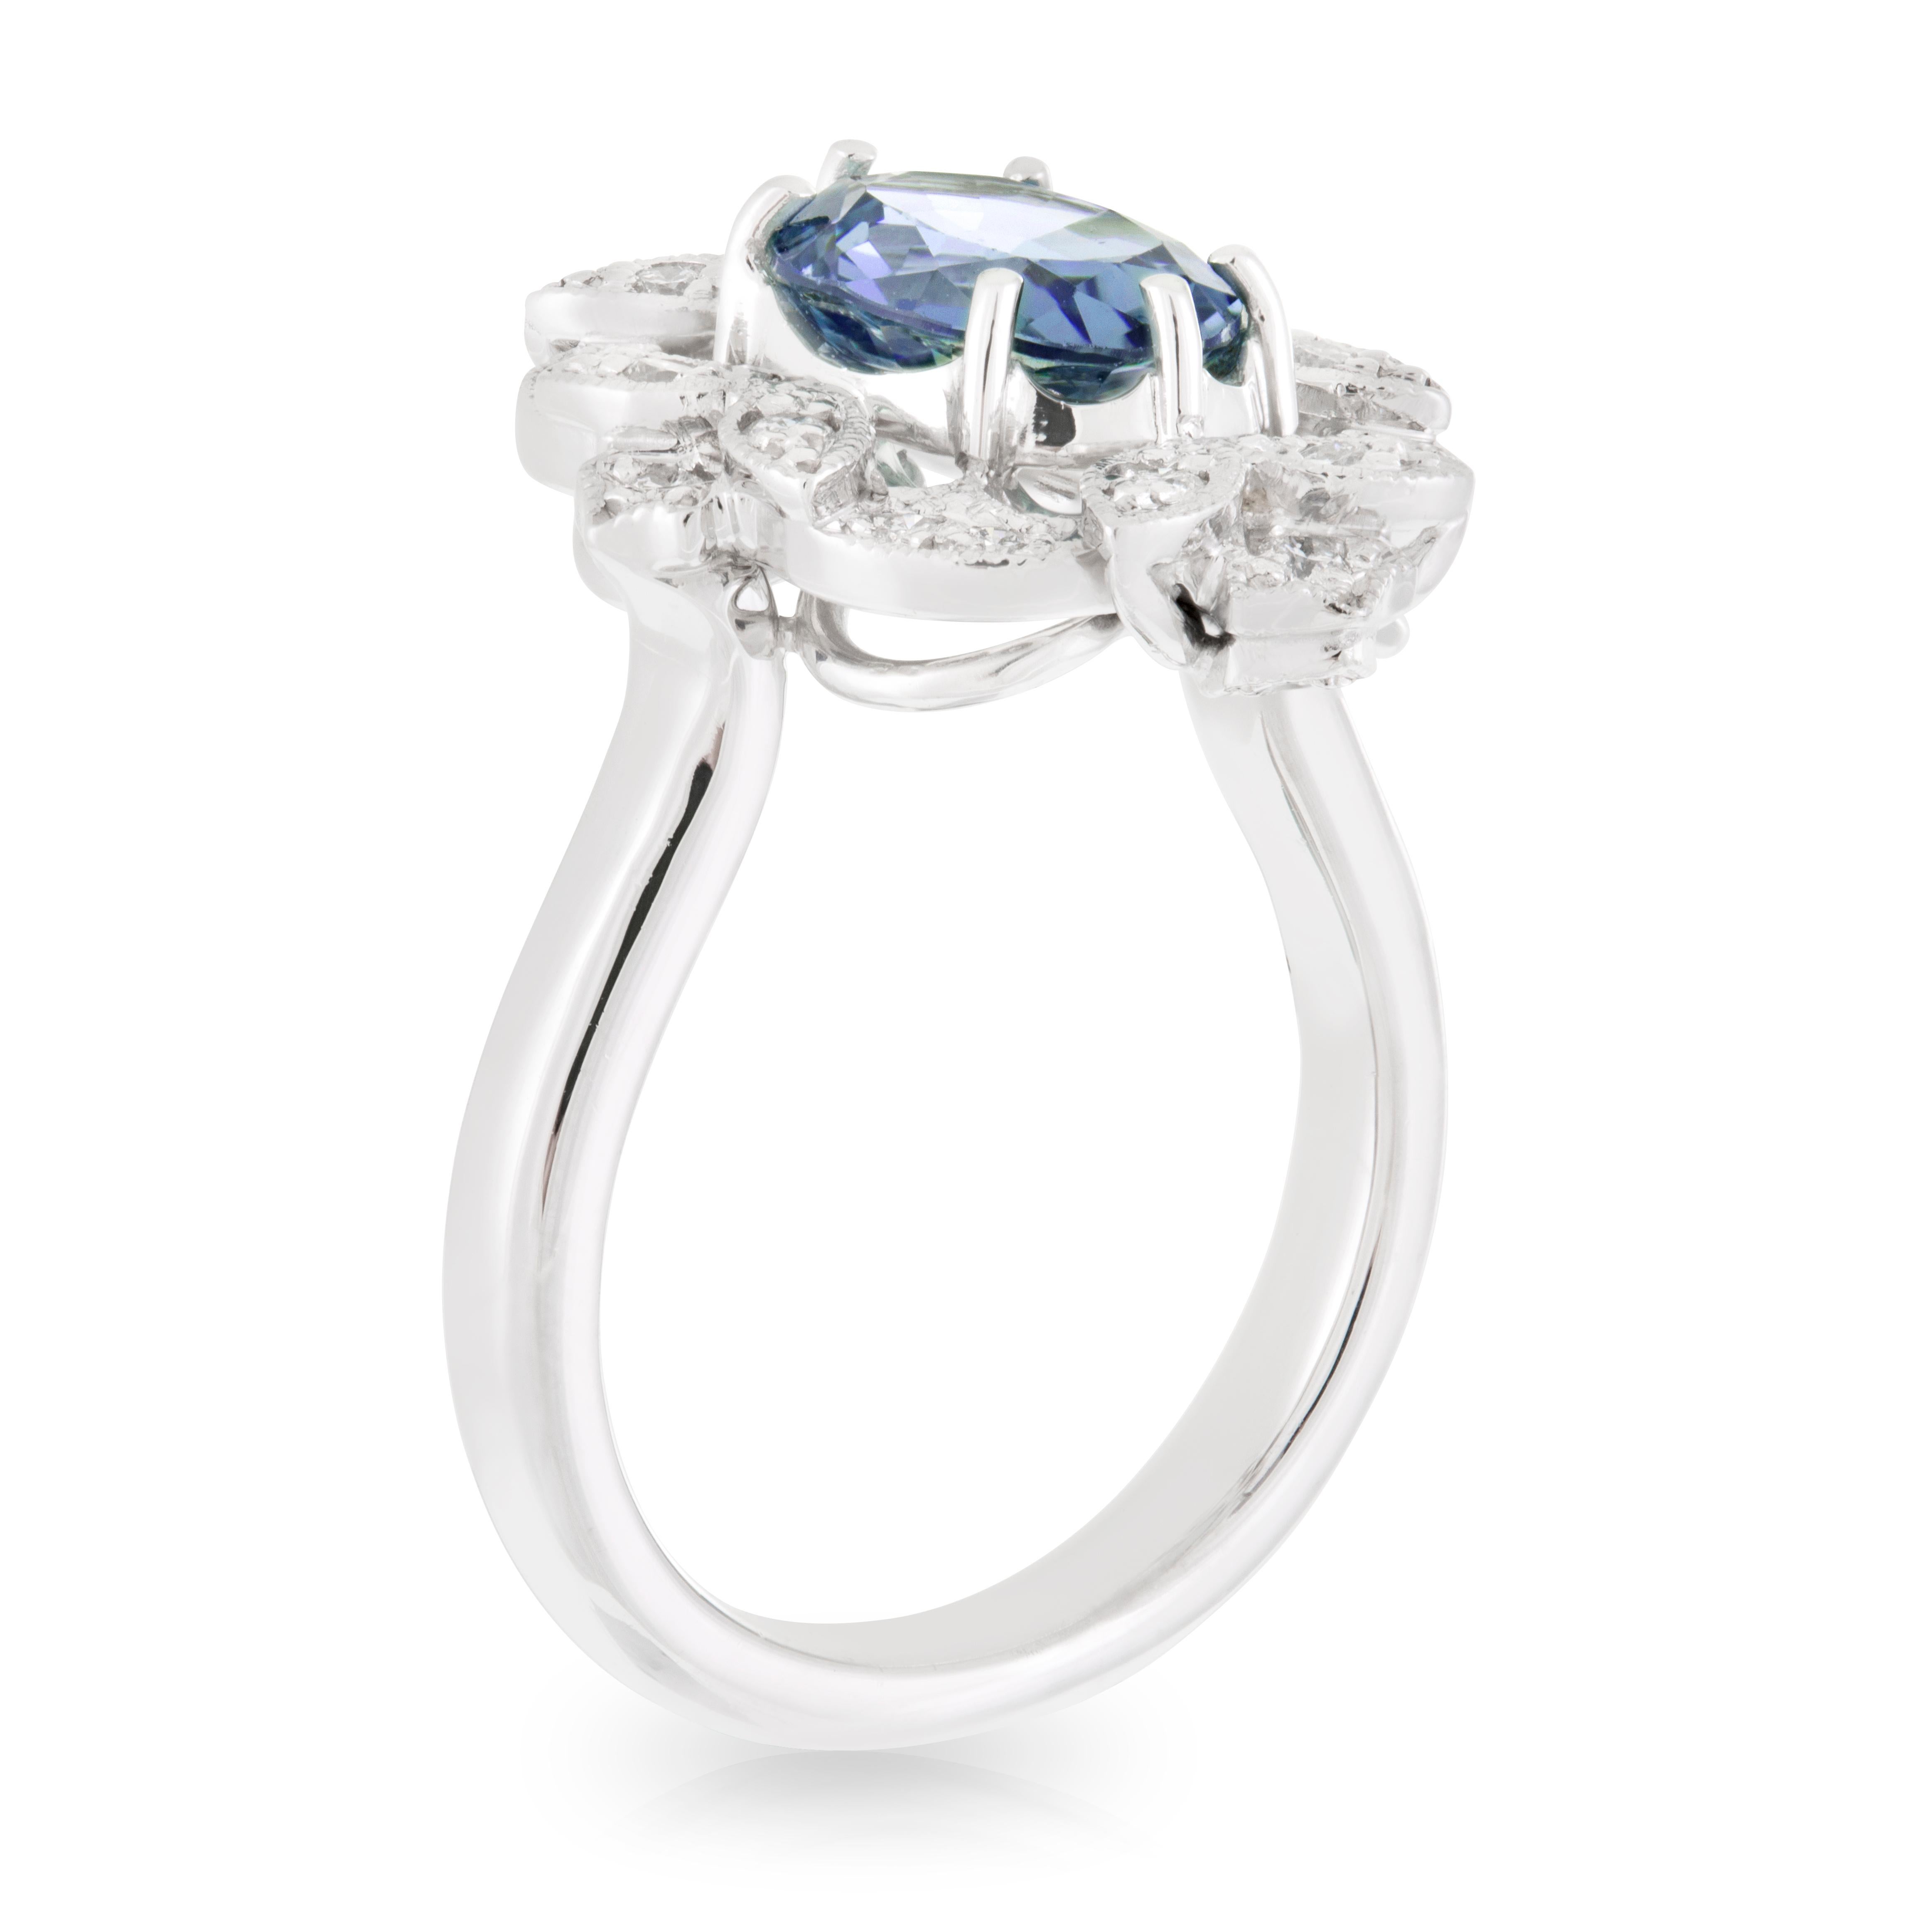 18ct White Gold 2.01ct Oval Ceylon Blue Sapphire with Art Deco style Diamond Halo Engagement Ring. TDW 0.26ct.